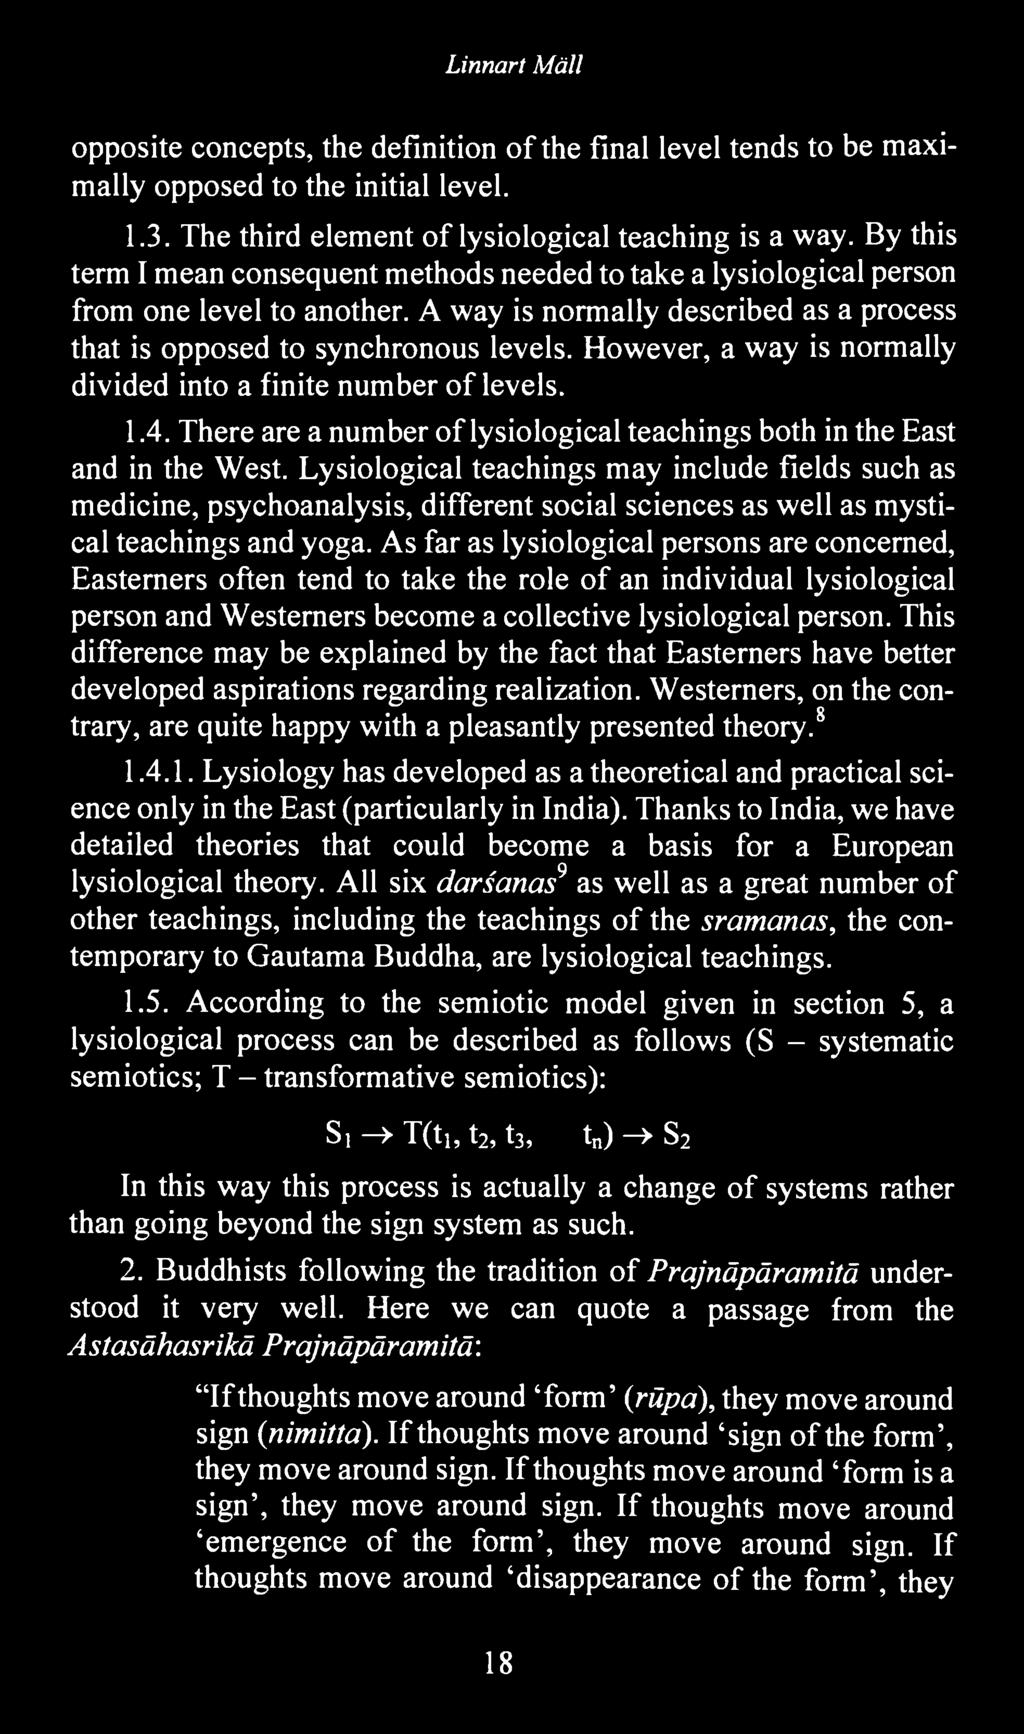 However, a way is normally divided into a finite number of levels. 1.4. There are a number of lysiological teachings both in the East and in the West.